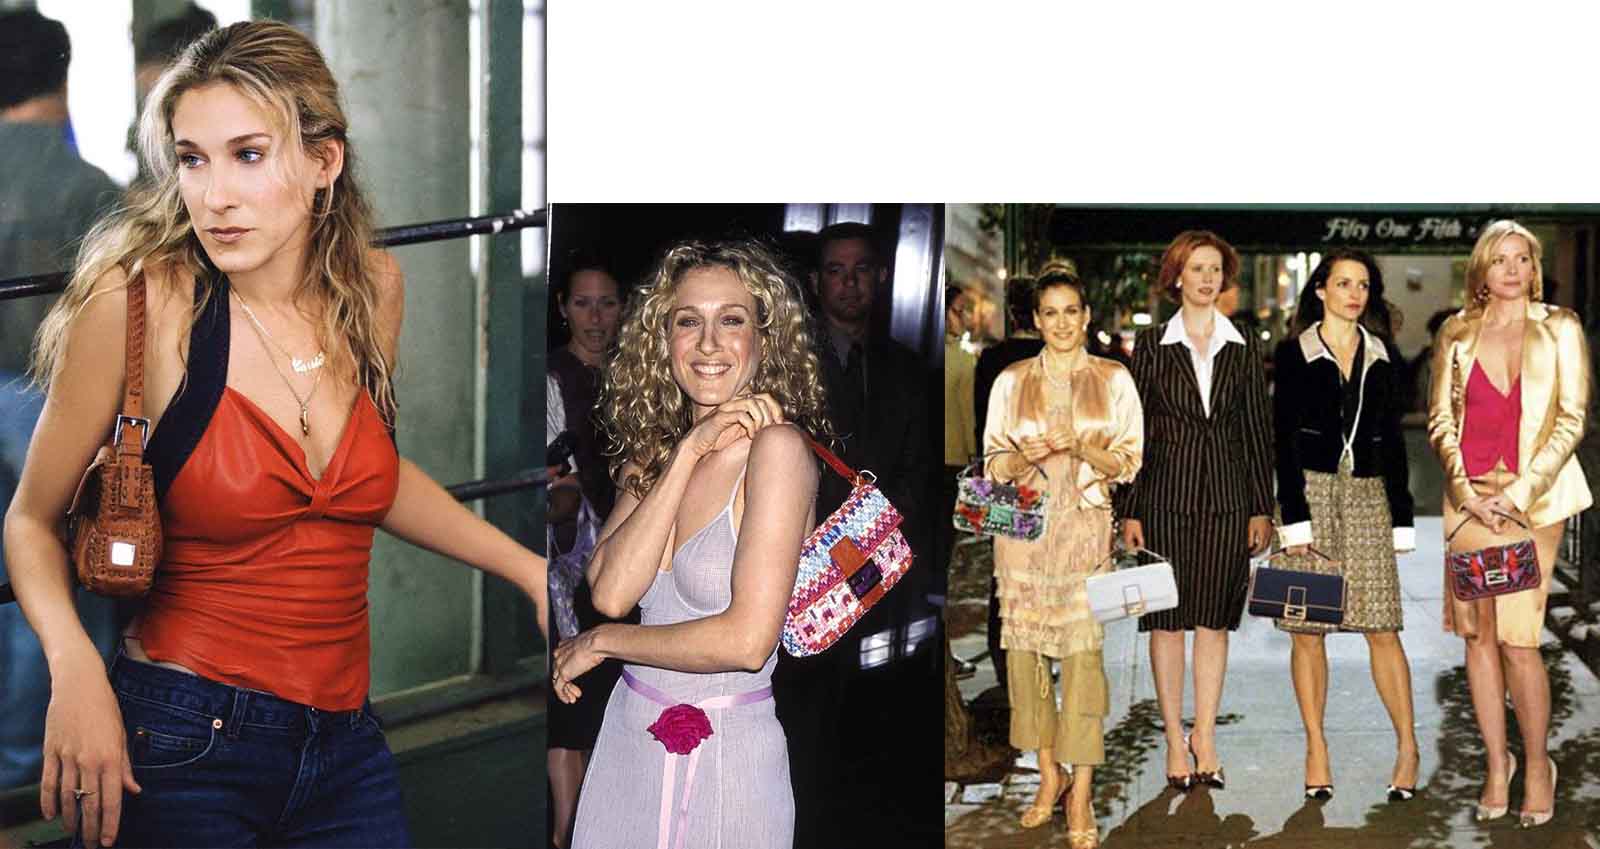 Channel your inner Carrie Bradshaw with these cute baguette bags